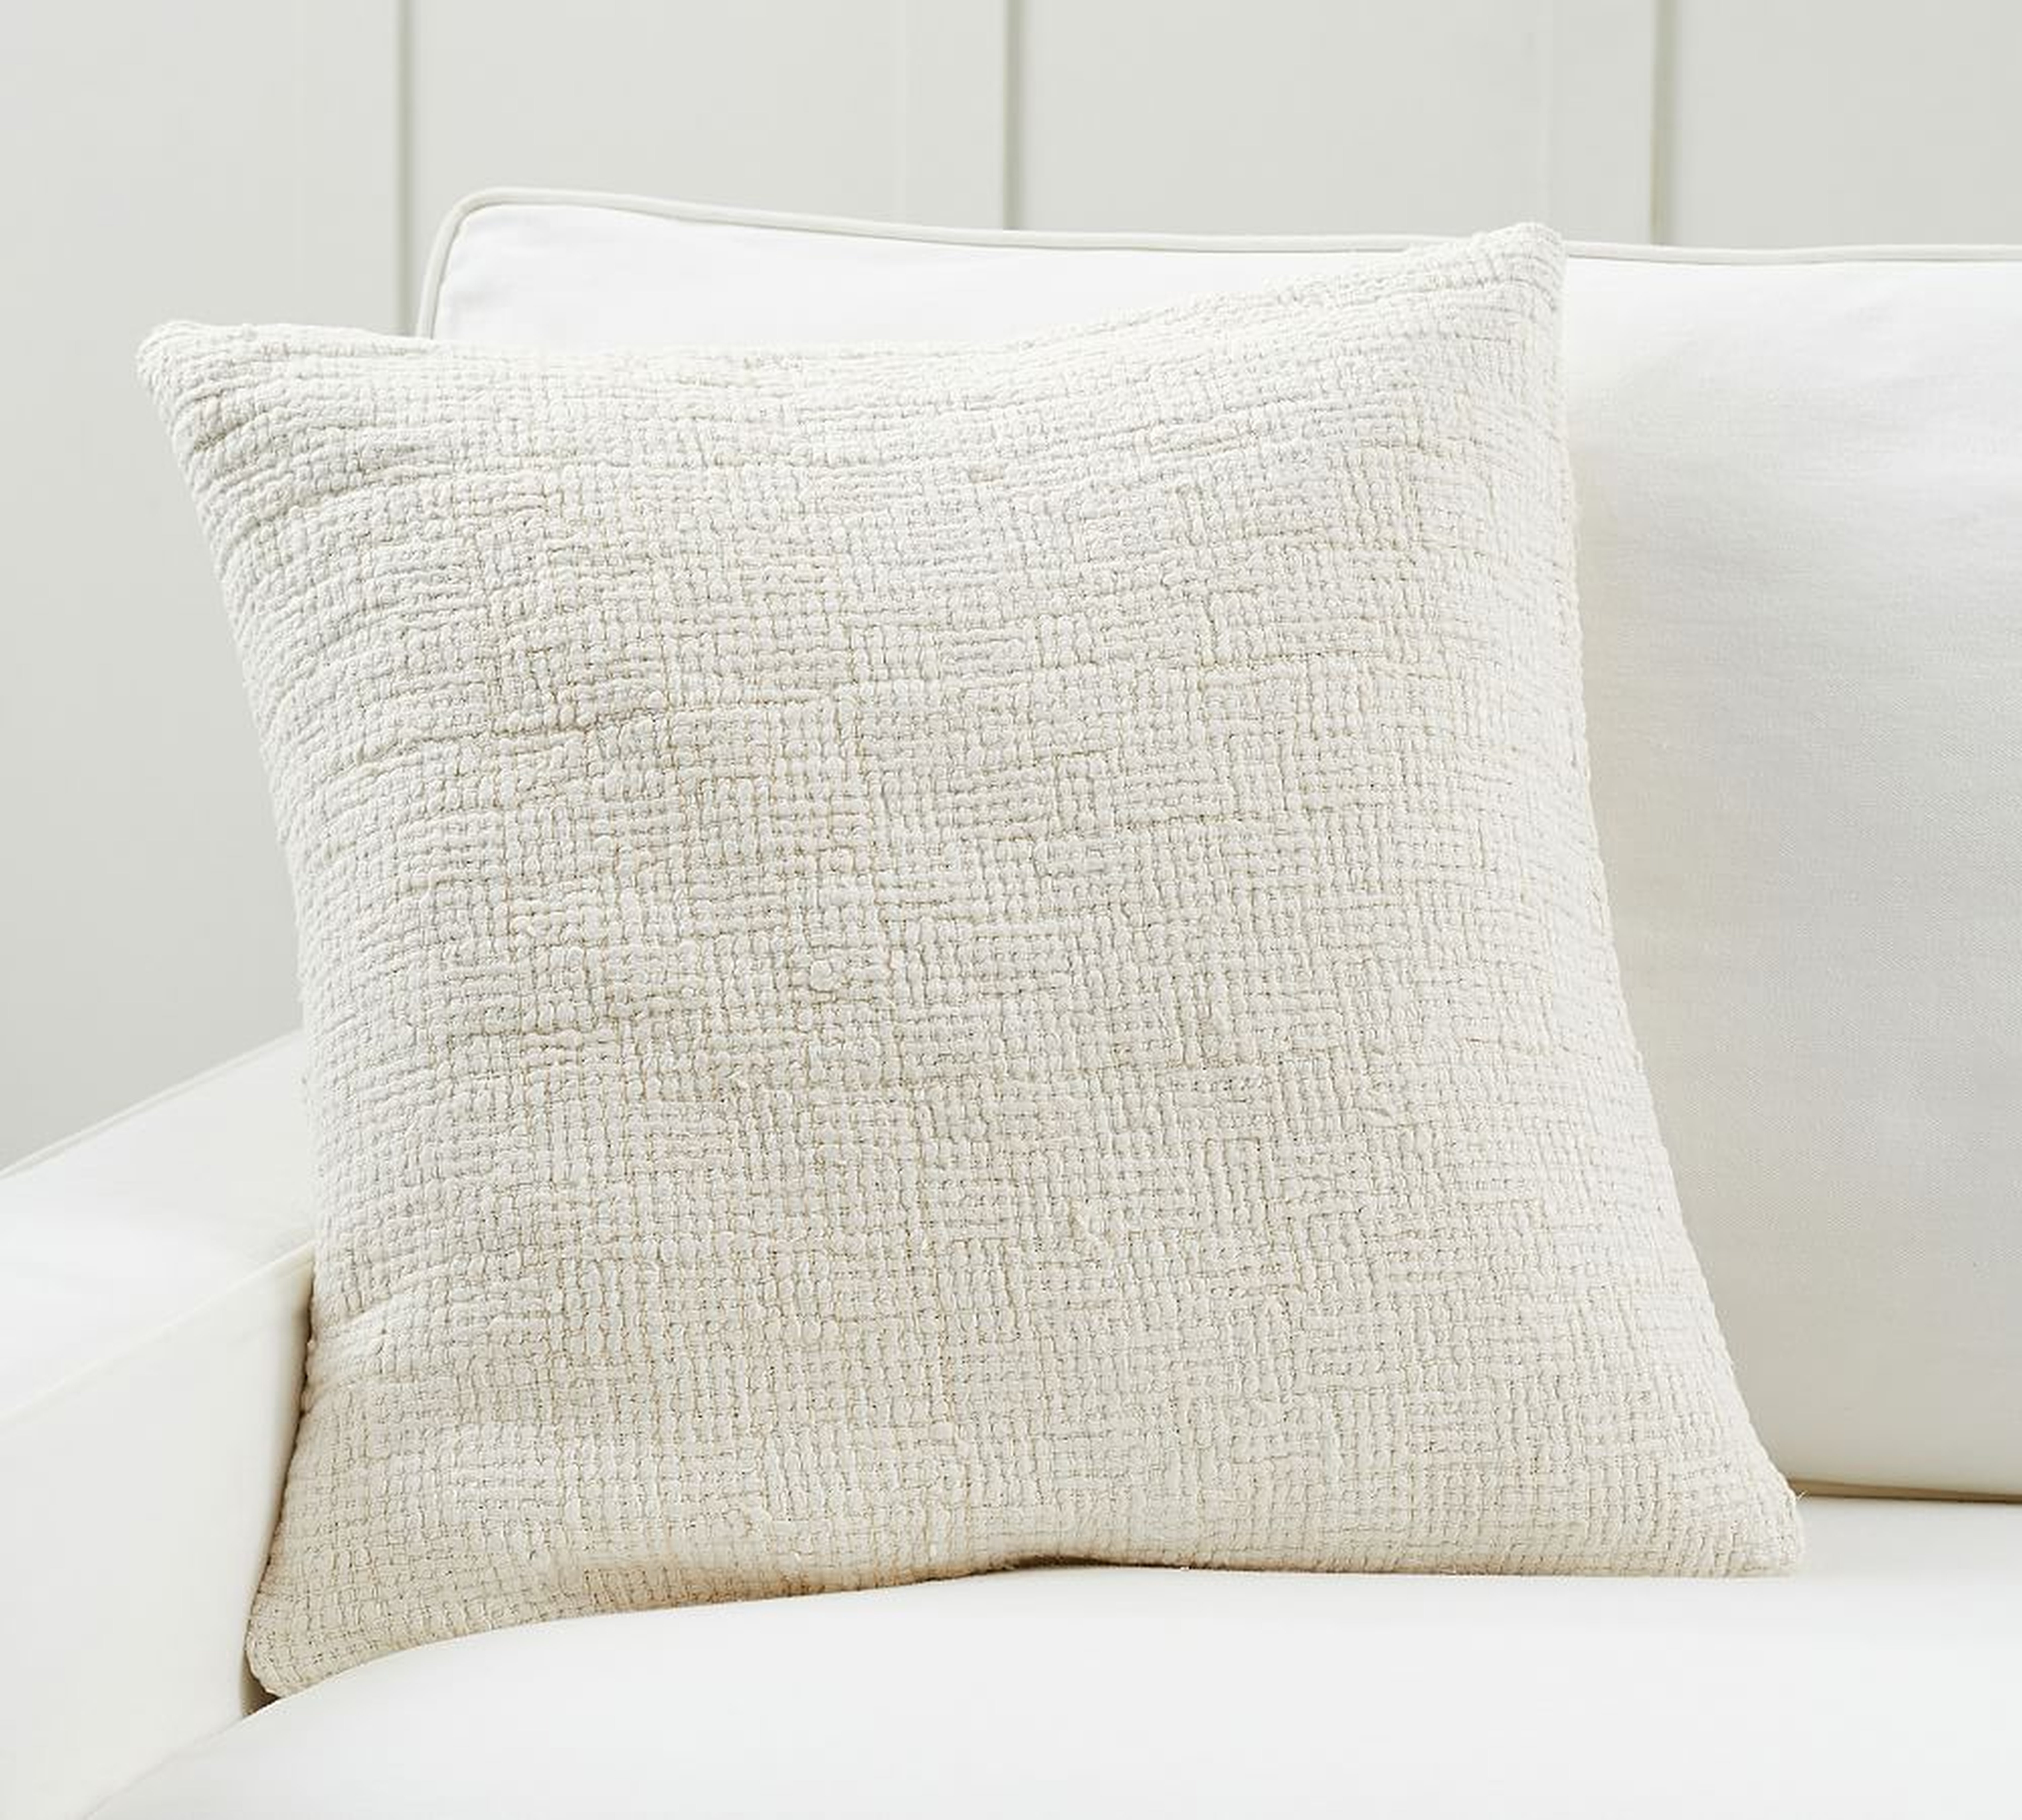 Ivy Linen Textured Pillow Cover, 22 x 22", Ivory - Pottery Barn